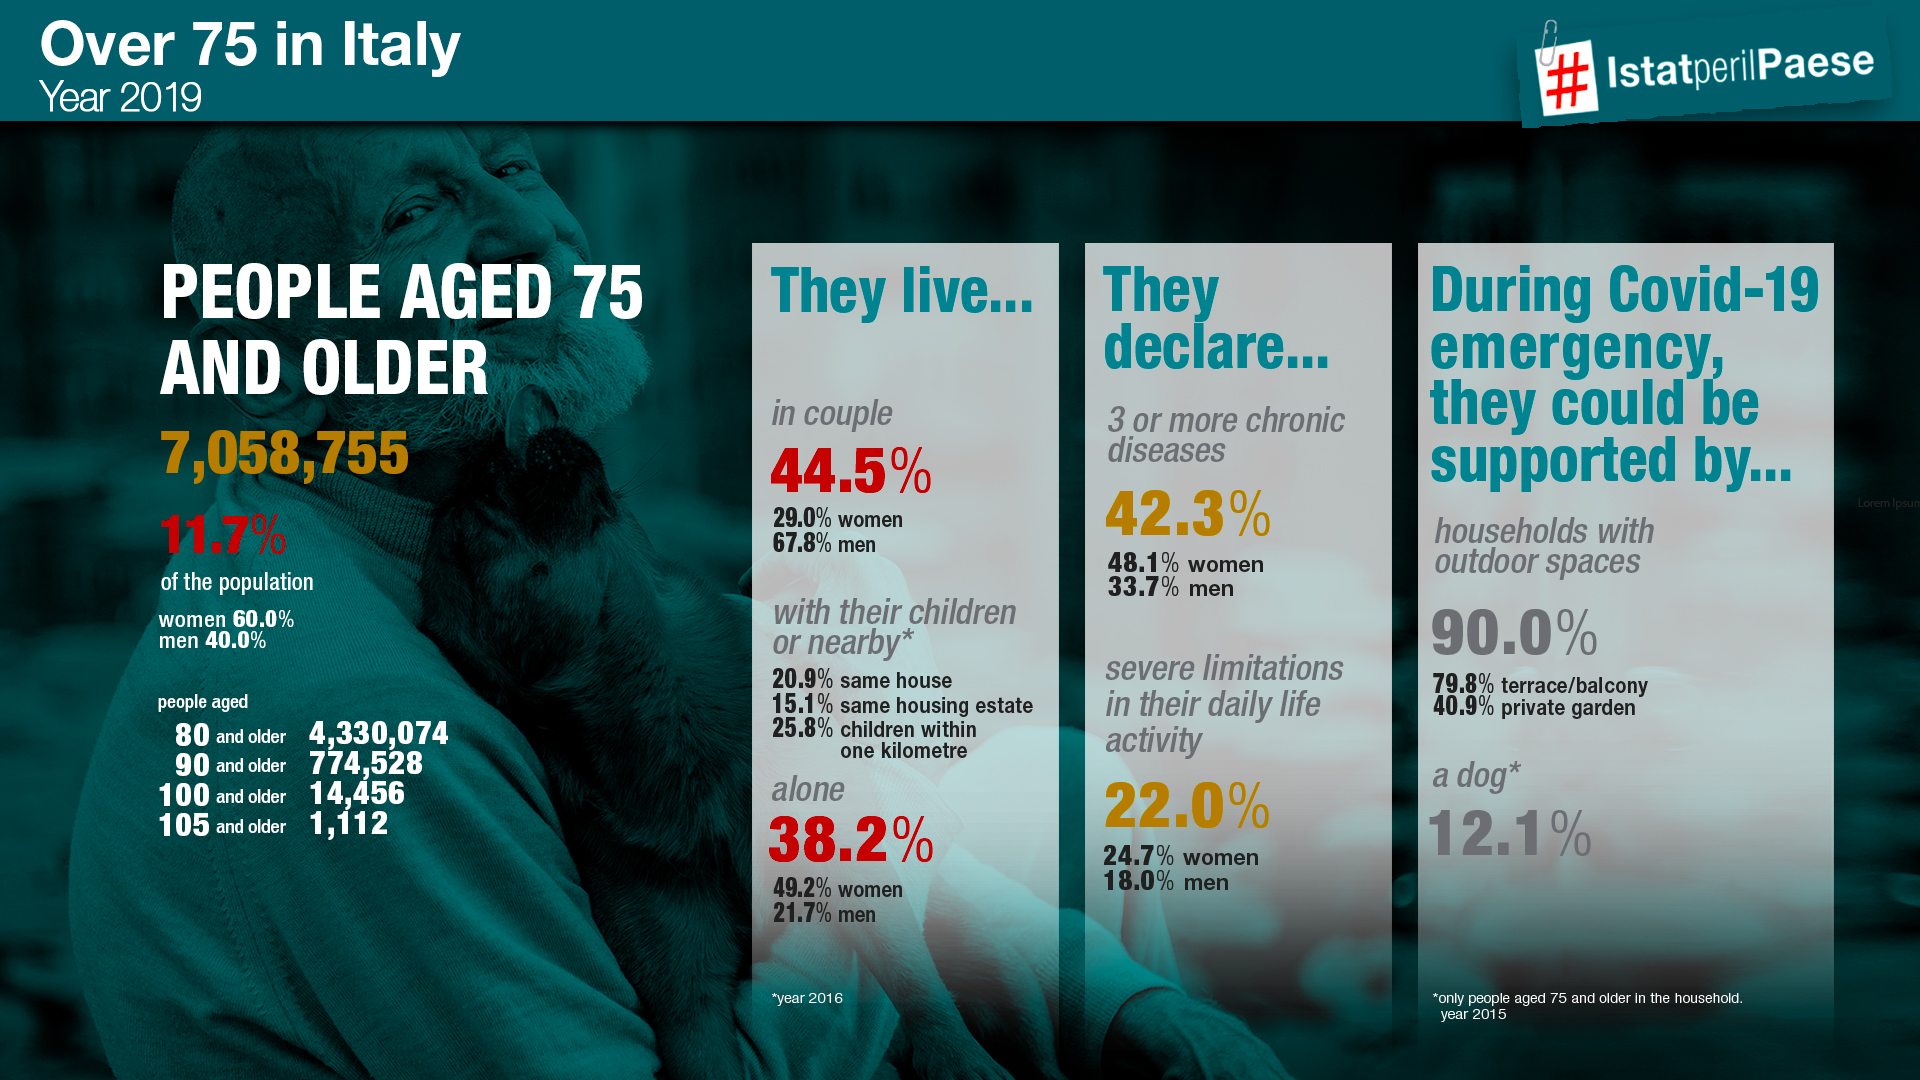 People aged 75 and older in Italy-imfographic